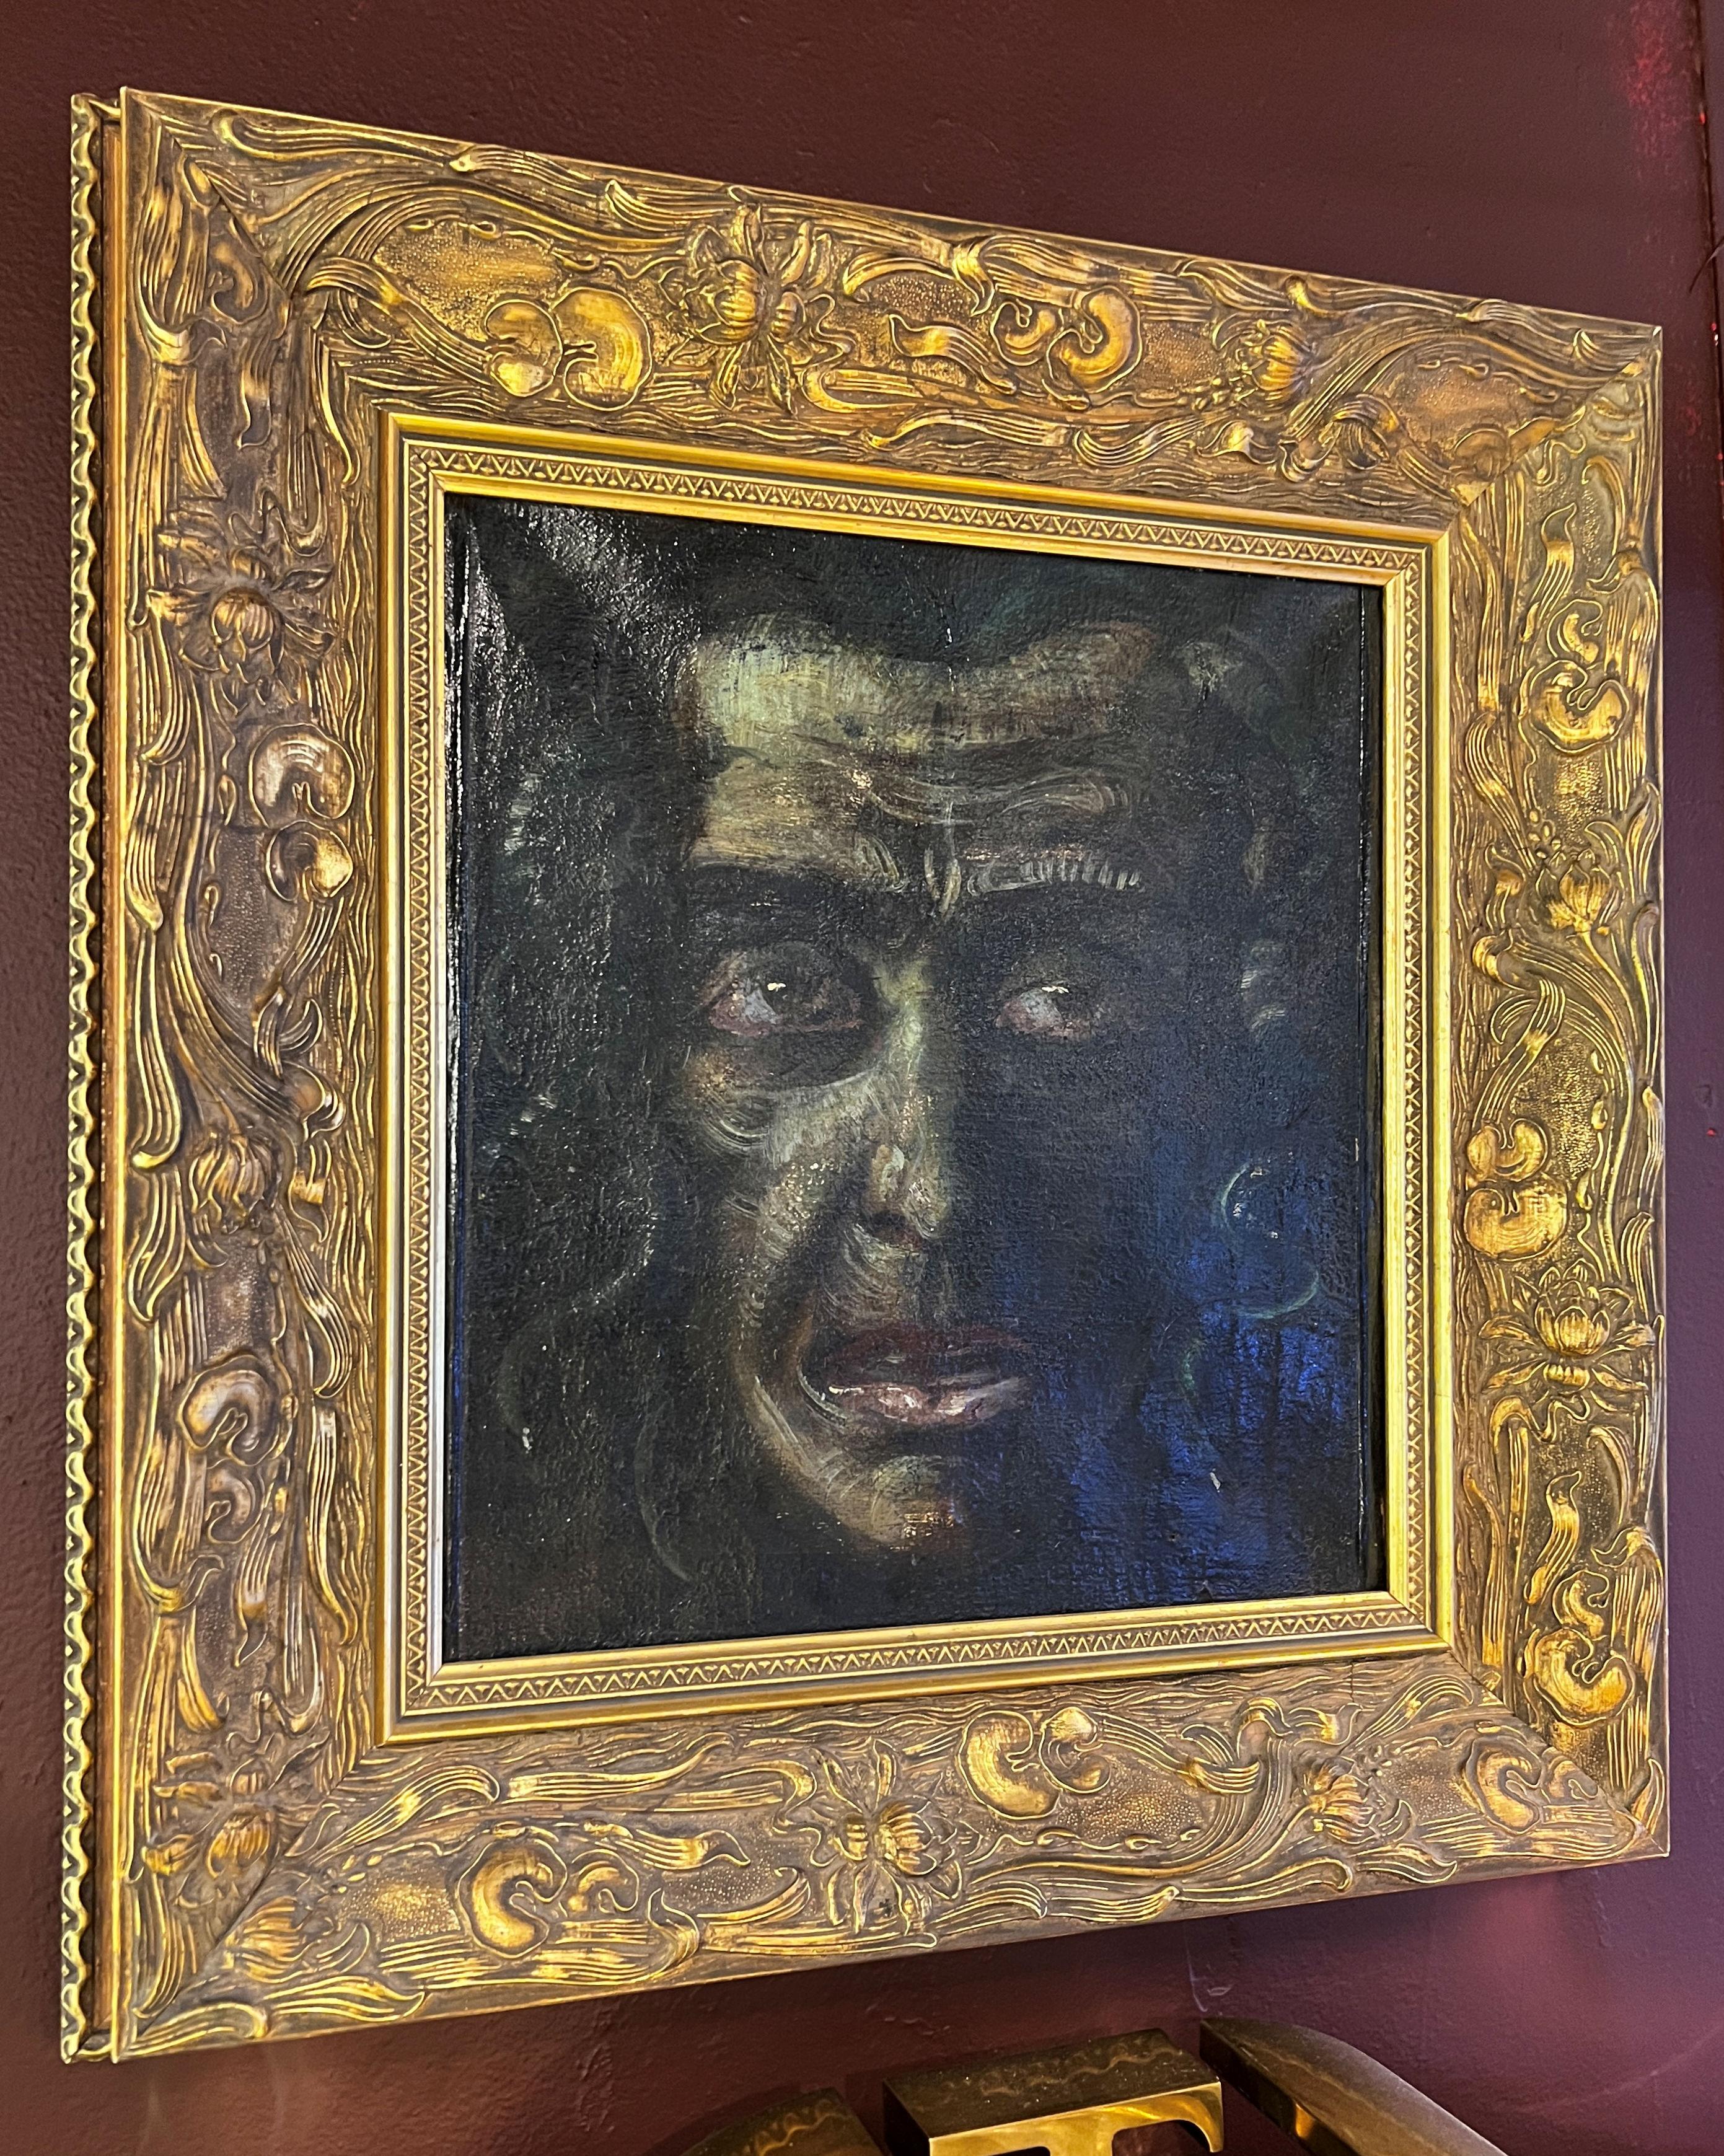 Our haunting and beautiful portrait on canvas of Medusa was painted by the Austrian-born artist Karel Eichhoff (1899-?).  Stretcher measures 12.25 by 13.25 inches and the period giltwood frame measures 20 by 21 inches. Signed in lower right. With